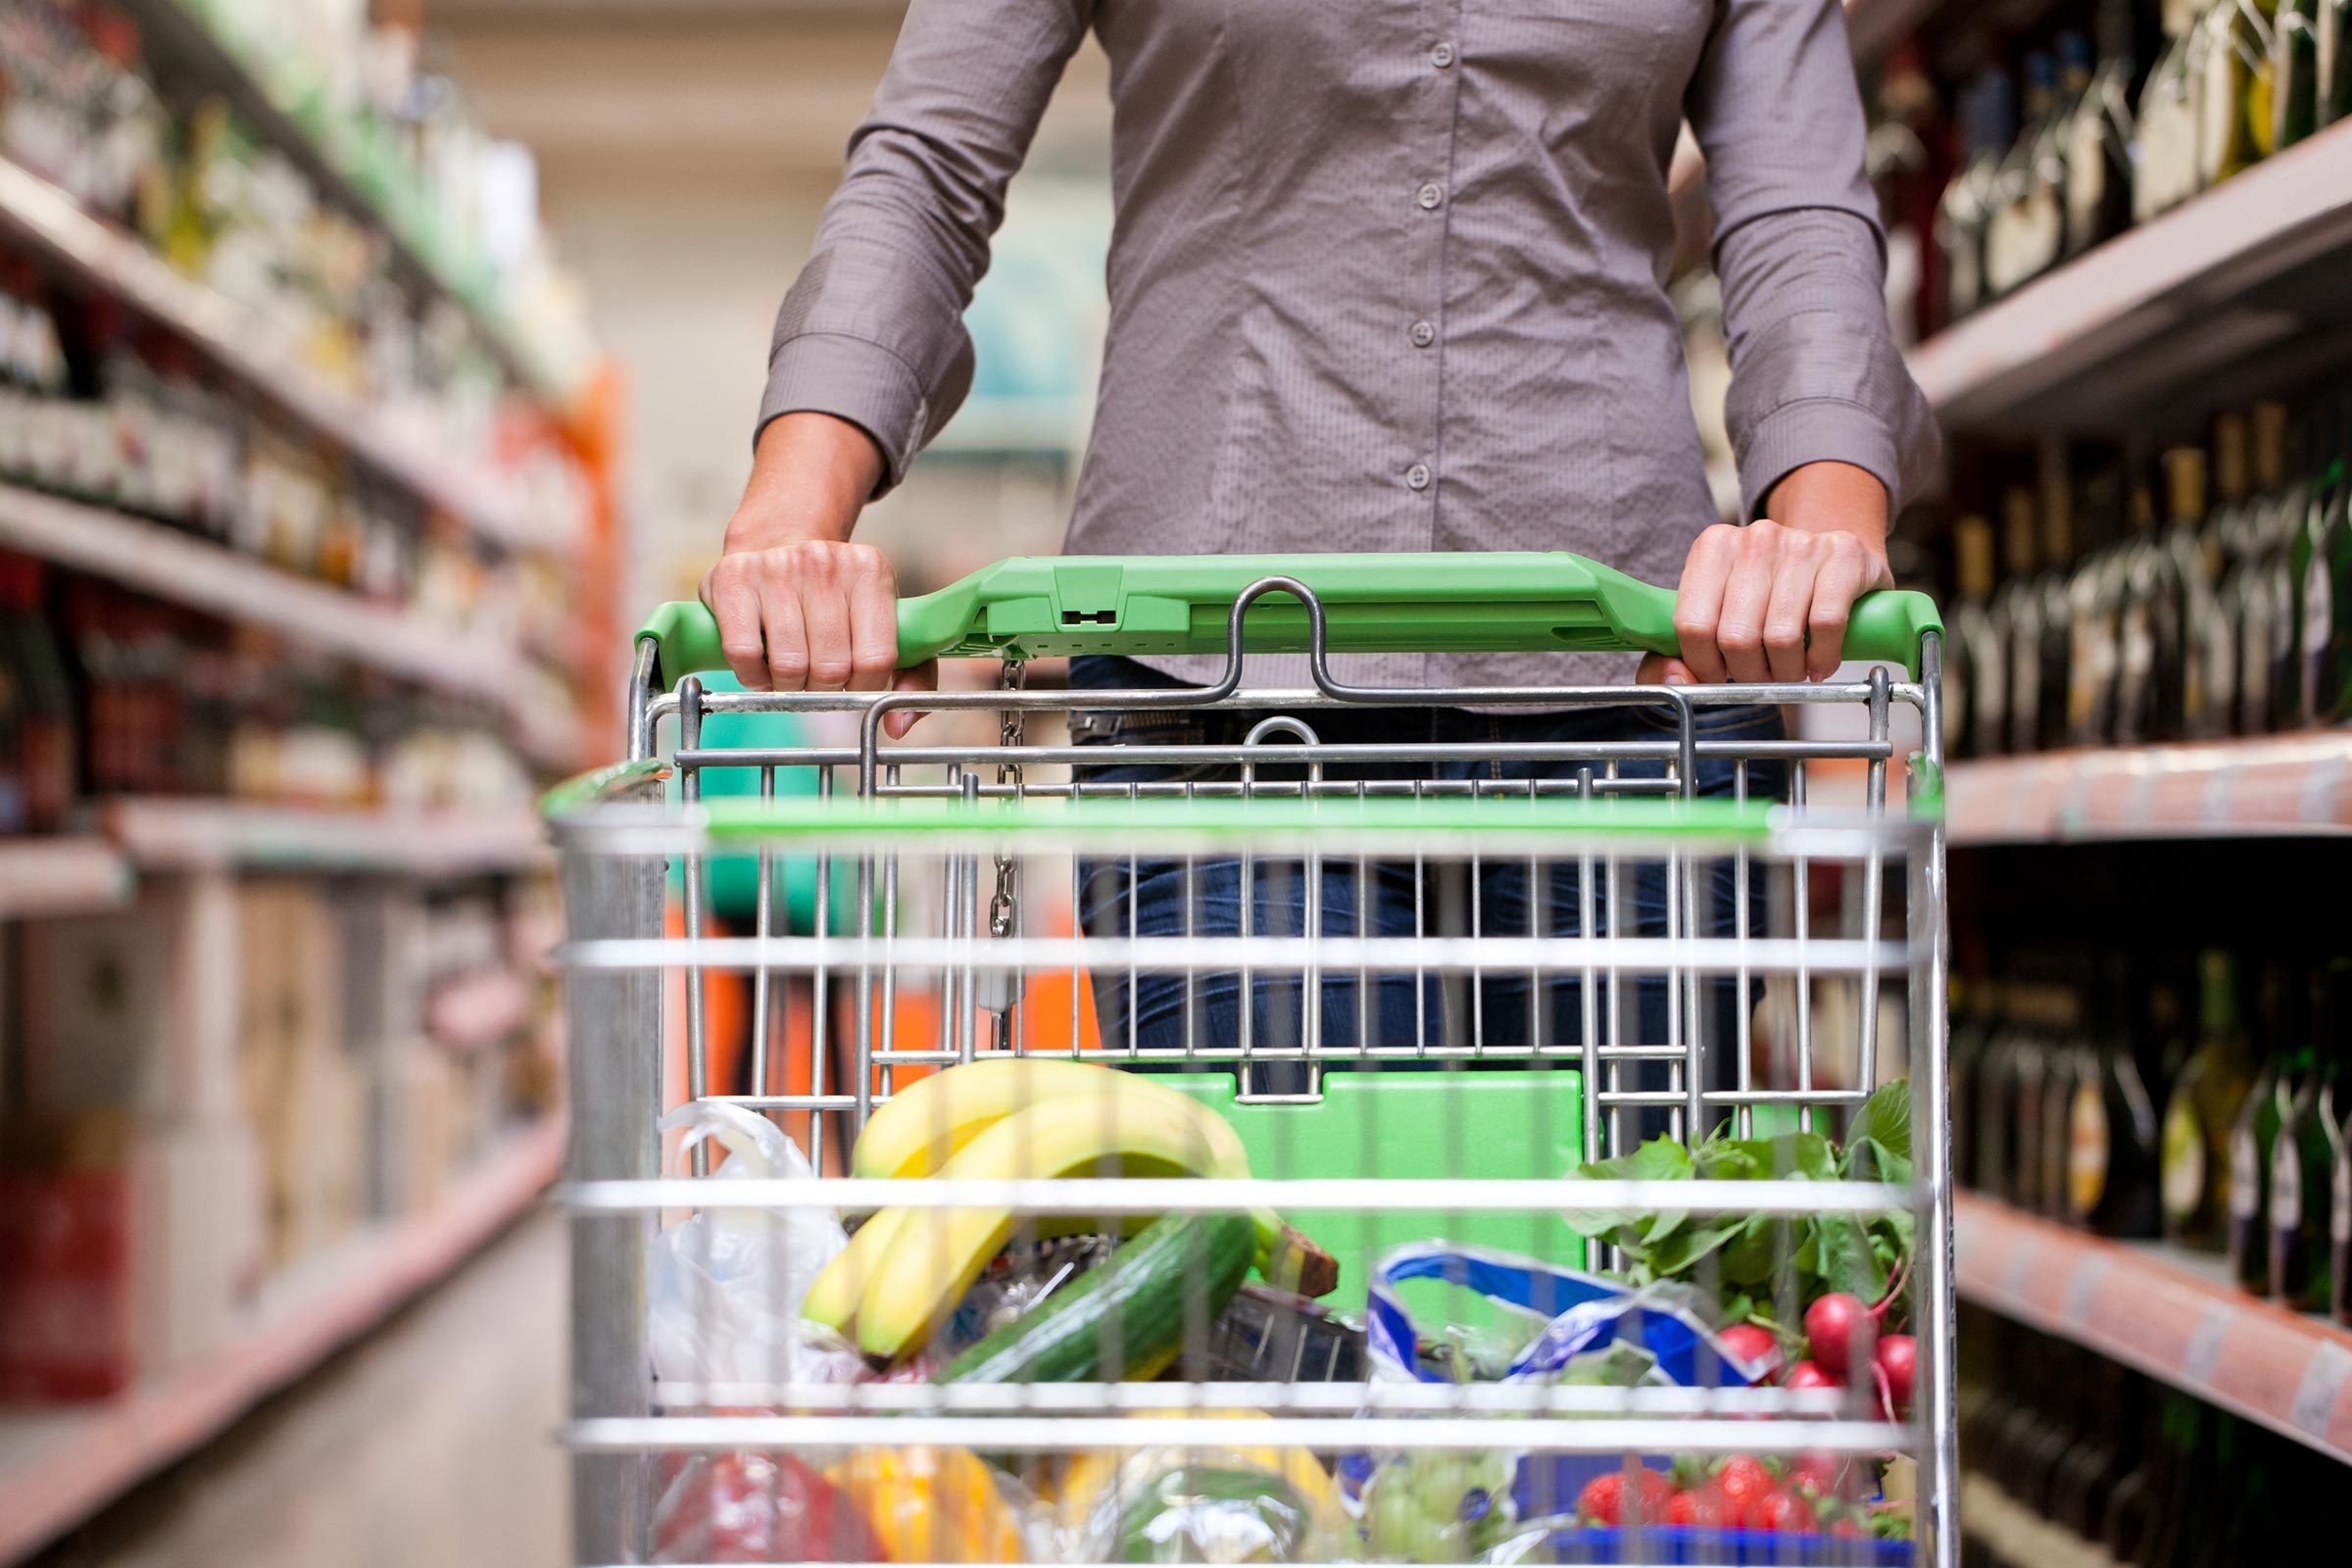 How to buy food in bulk and save money at the grocery store